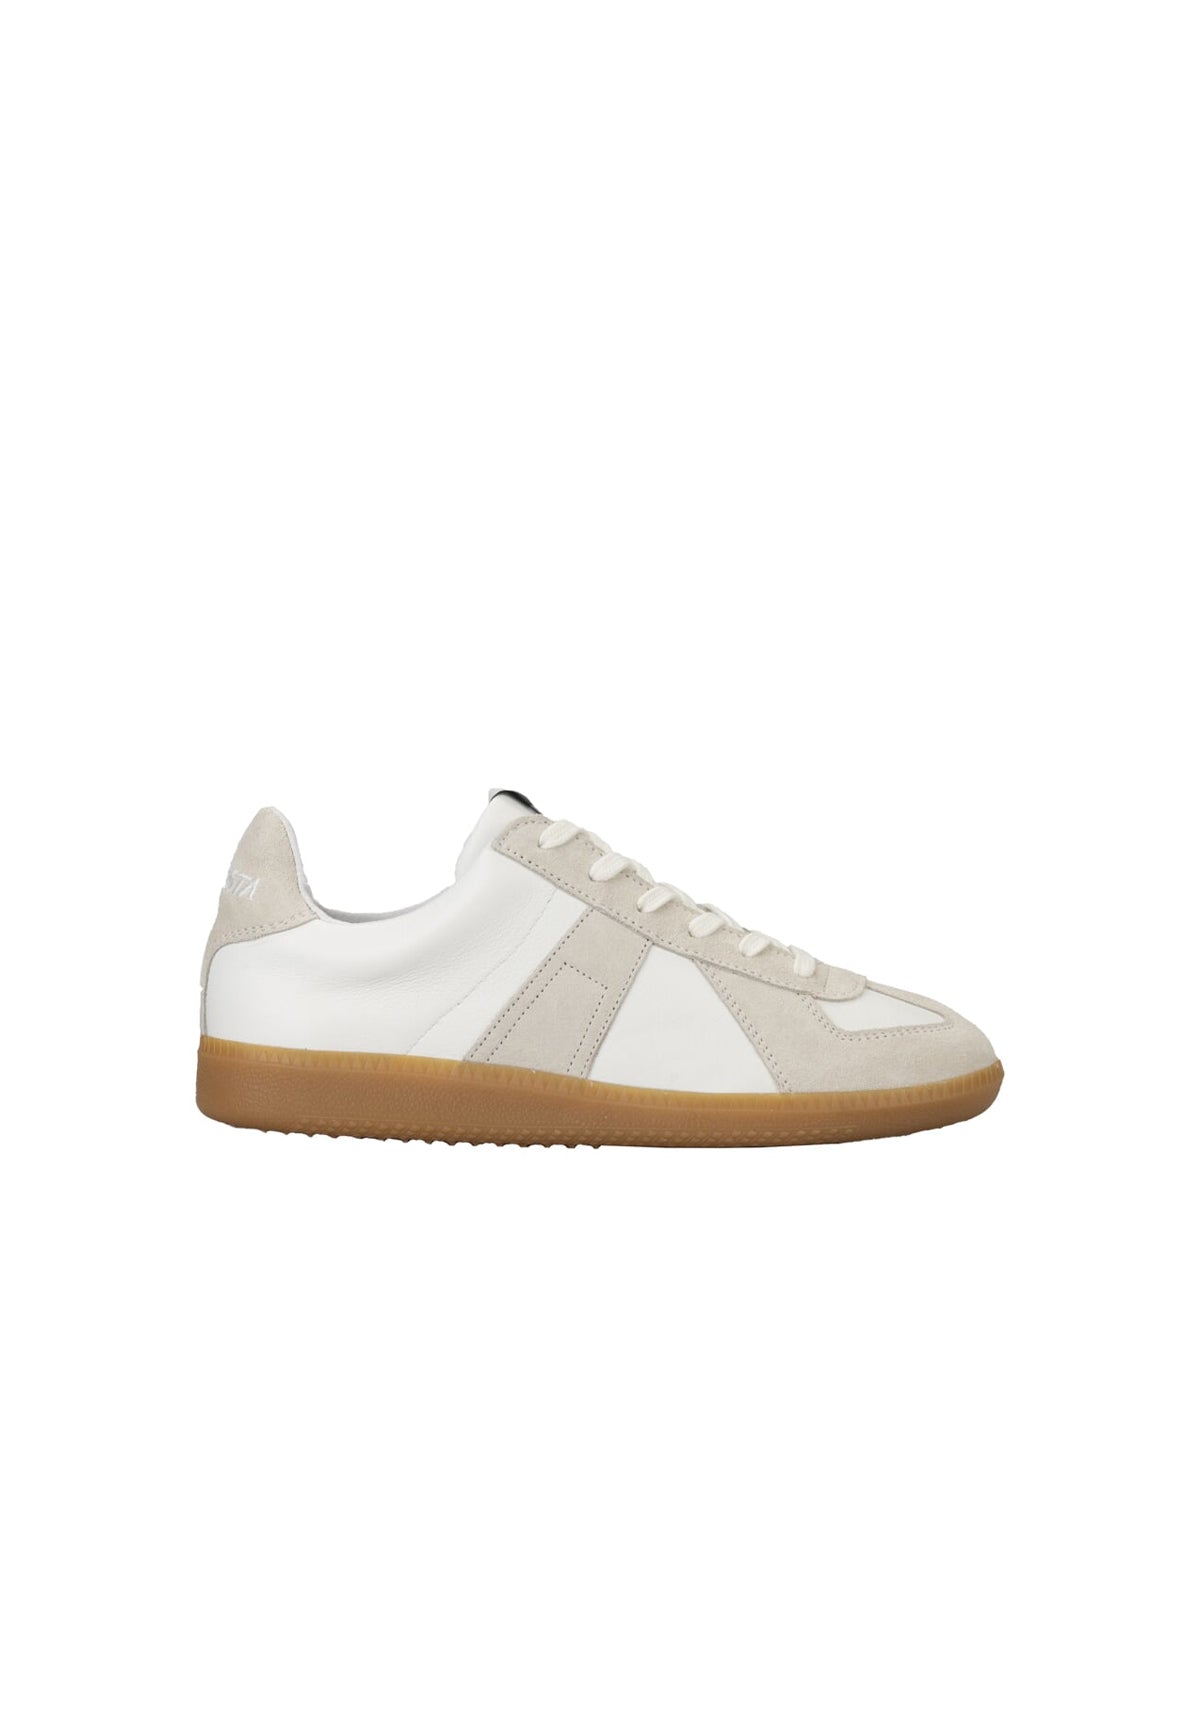 GERMAN ARMY TRAINER WHITE/TRANSPARENT - Moeon